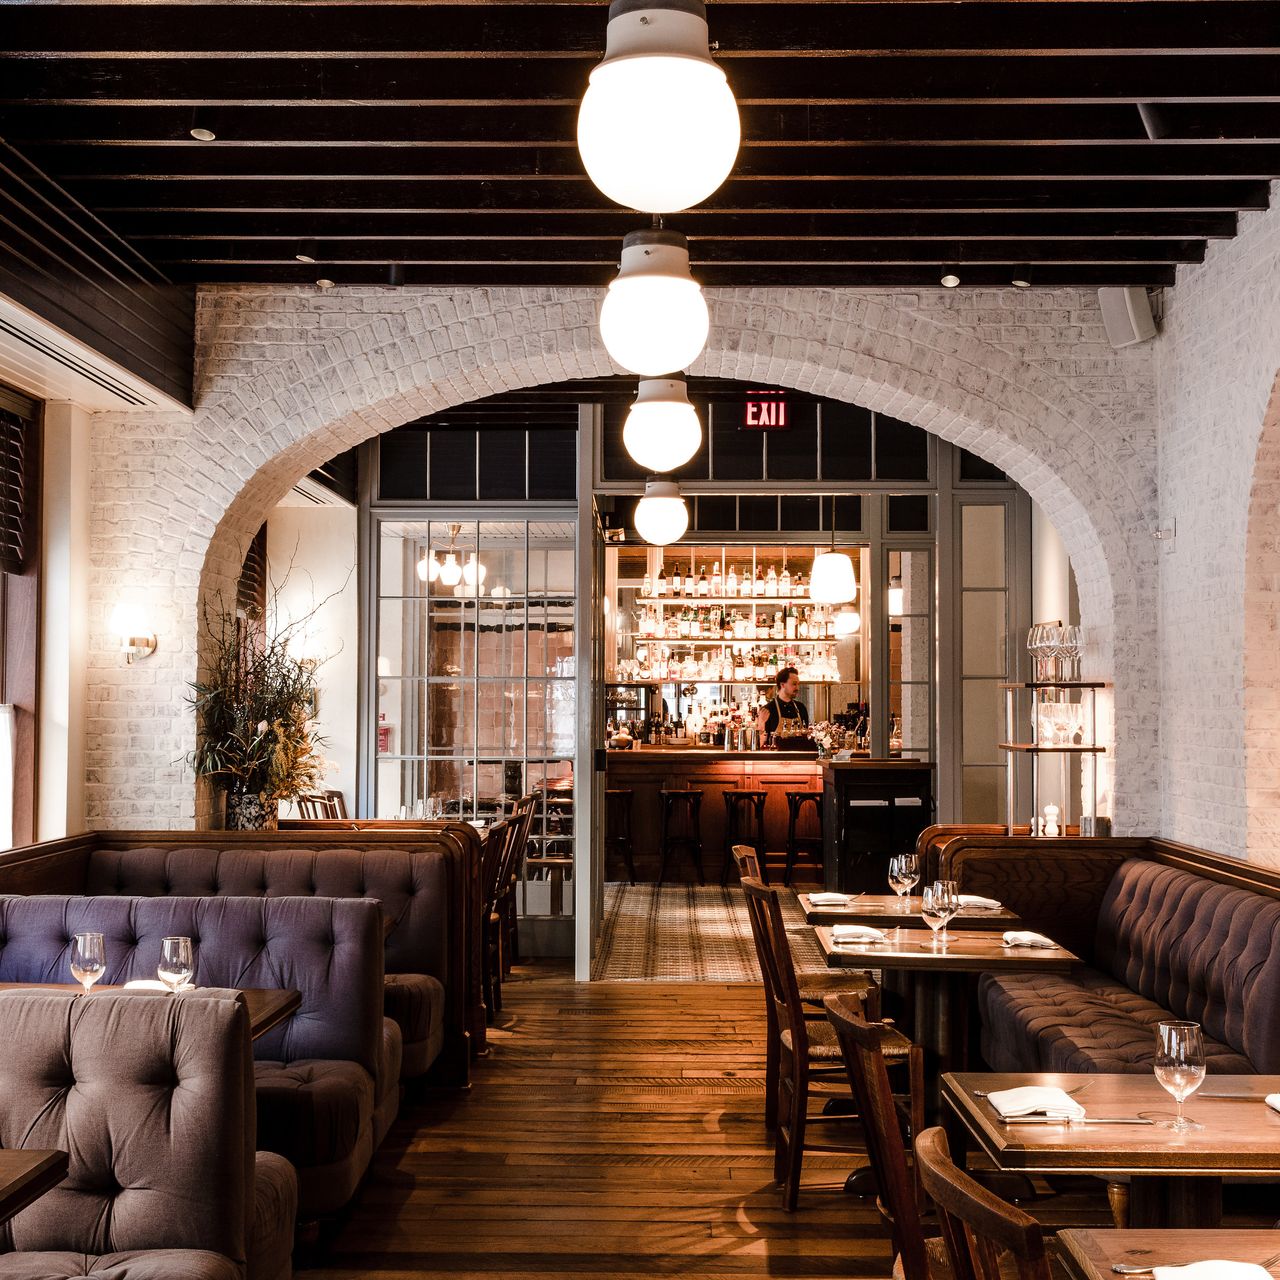 Philly chef opens The Hayes, an American tavern in Center City